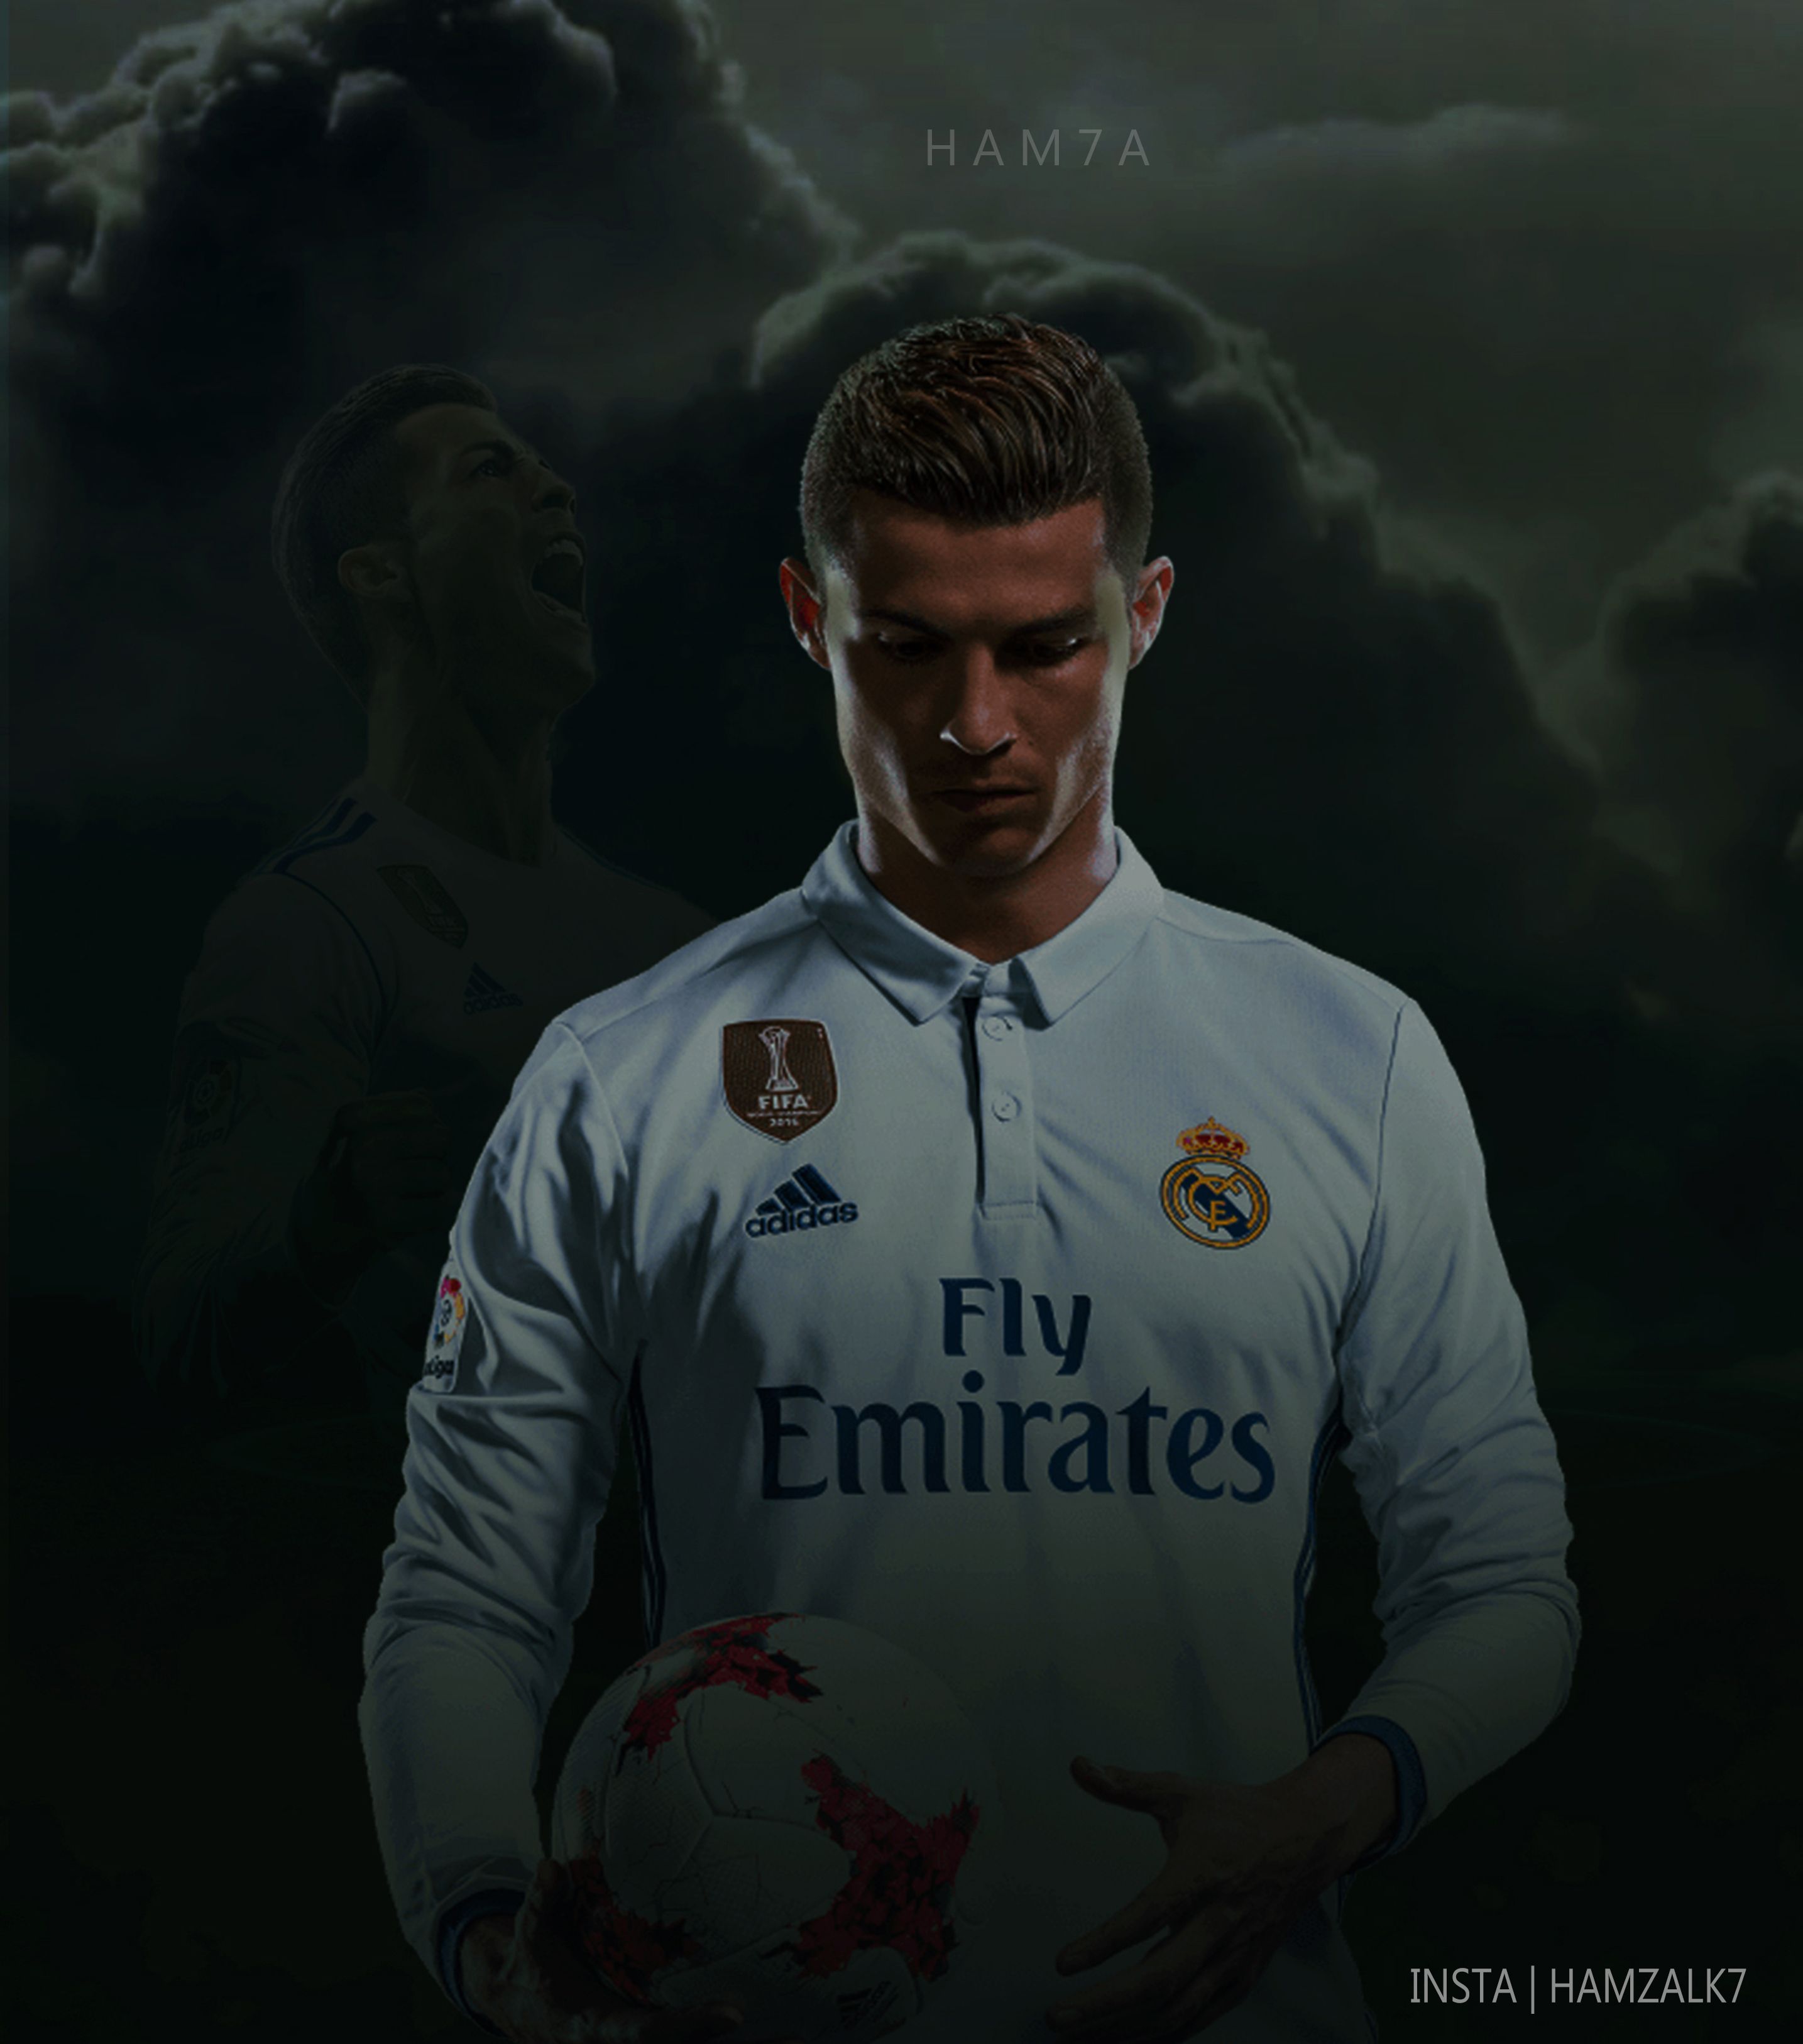 Cristiano Ronaldo Real Madrid Wallpaper & Background Beautiful Best Available For Download Cristiano Ronaldo Real Madrid Photo Free On Zicxa.com Image